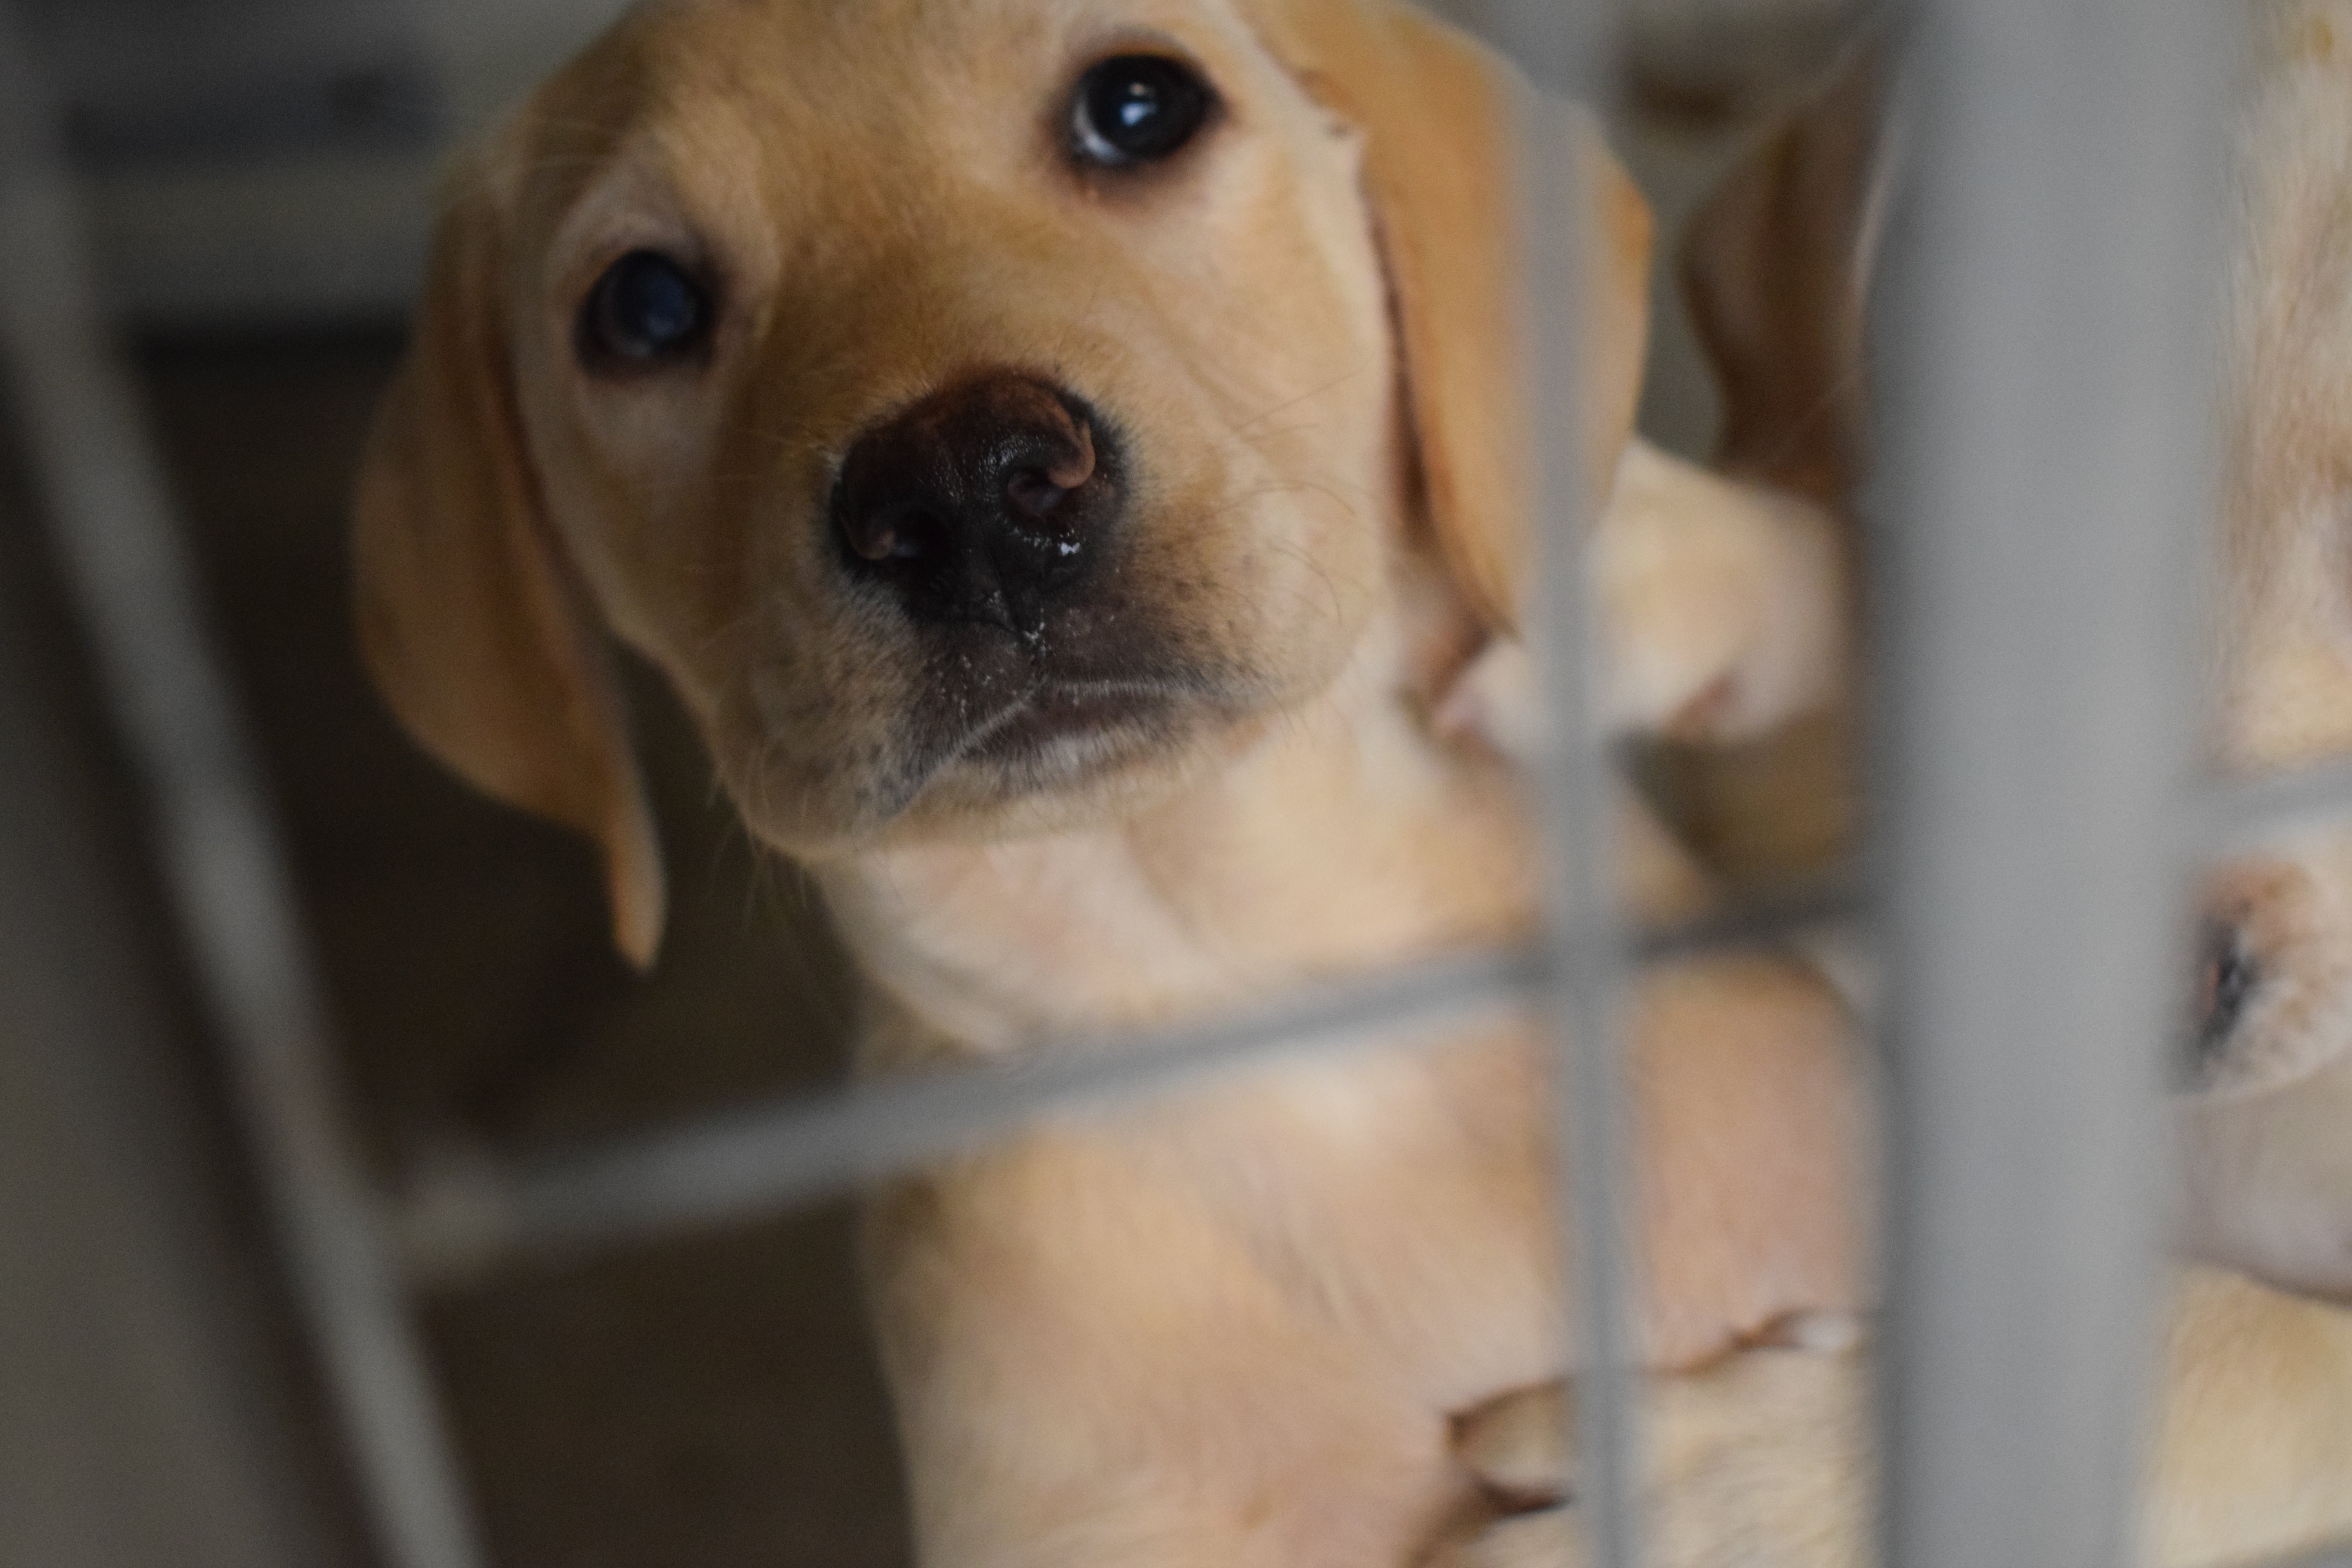 New law would acknowledge that animals are sentient creatures with feelings